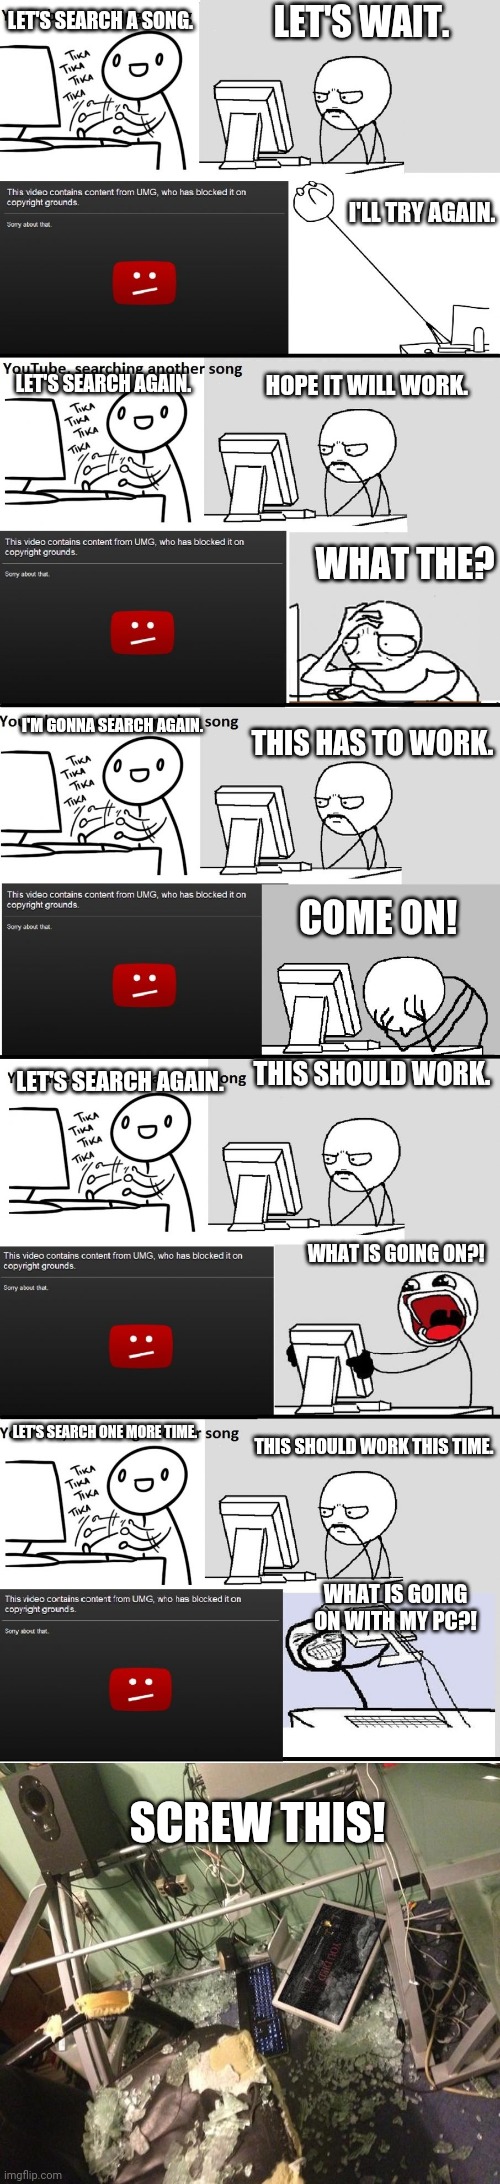 YouTube Music Song Search Meme | LET'S WAIT. LET'S SEARCH A SONG. I'LL TRY AGAIN. LET'S SEARCH AGAIN. HOPE IT WILL WORK. WHAT THE? I'M GONNA SEARCH AGAIN. THIS HAS TO WORK. COME ON! THIS SHOULD WORK. LET'S SEARCH AGAIN. WHAT IS GOING ON?! LET'S SEARCH ONE MORE TIME. THIS SHOULD WORK THIS TIME. WHAT IS GOING ON WITH MY PC?! SCREW THIS! | image tagged in youtube music song search meme | made w/ Imgflip meme maker